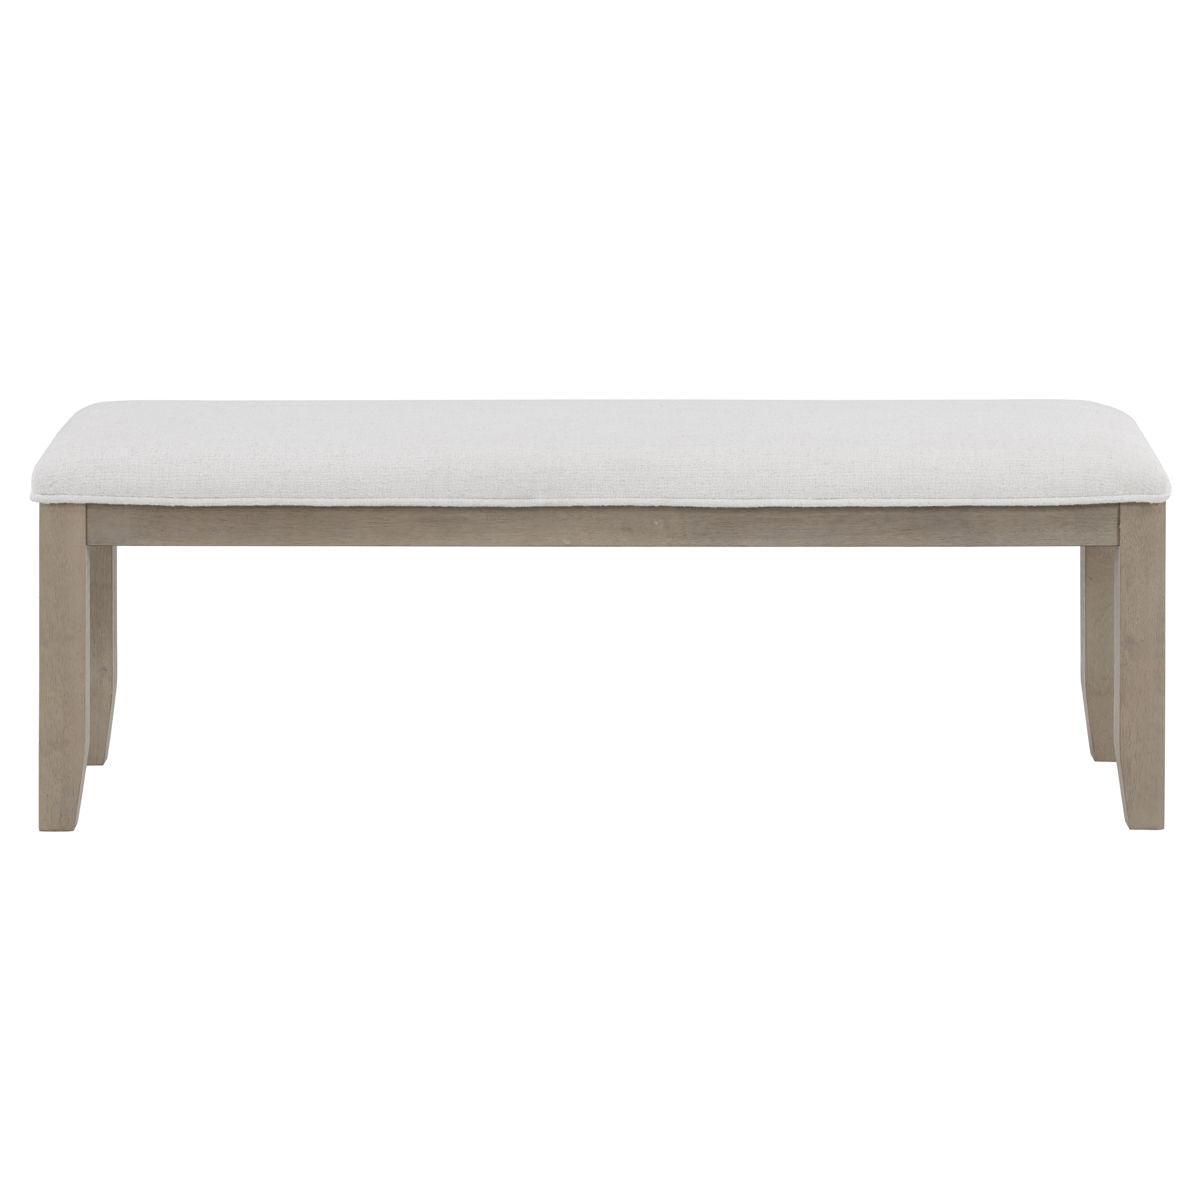 Steve Silver Furniture - Lily - Bench - Gray - 5th Avenue Furniture